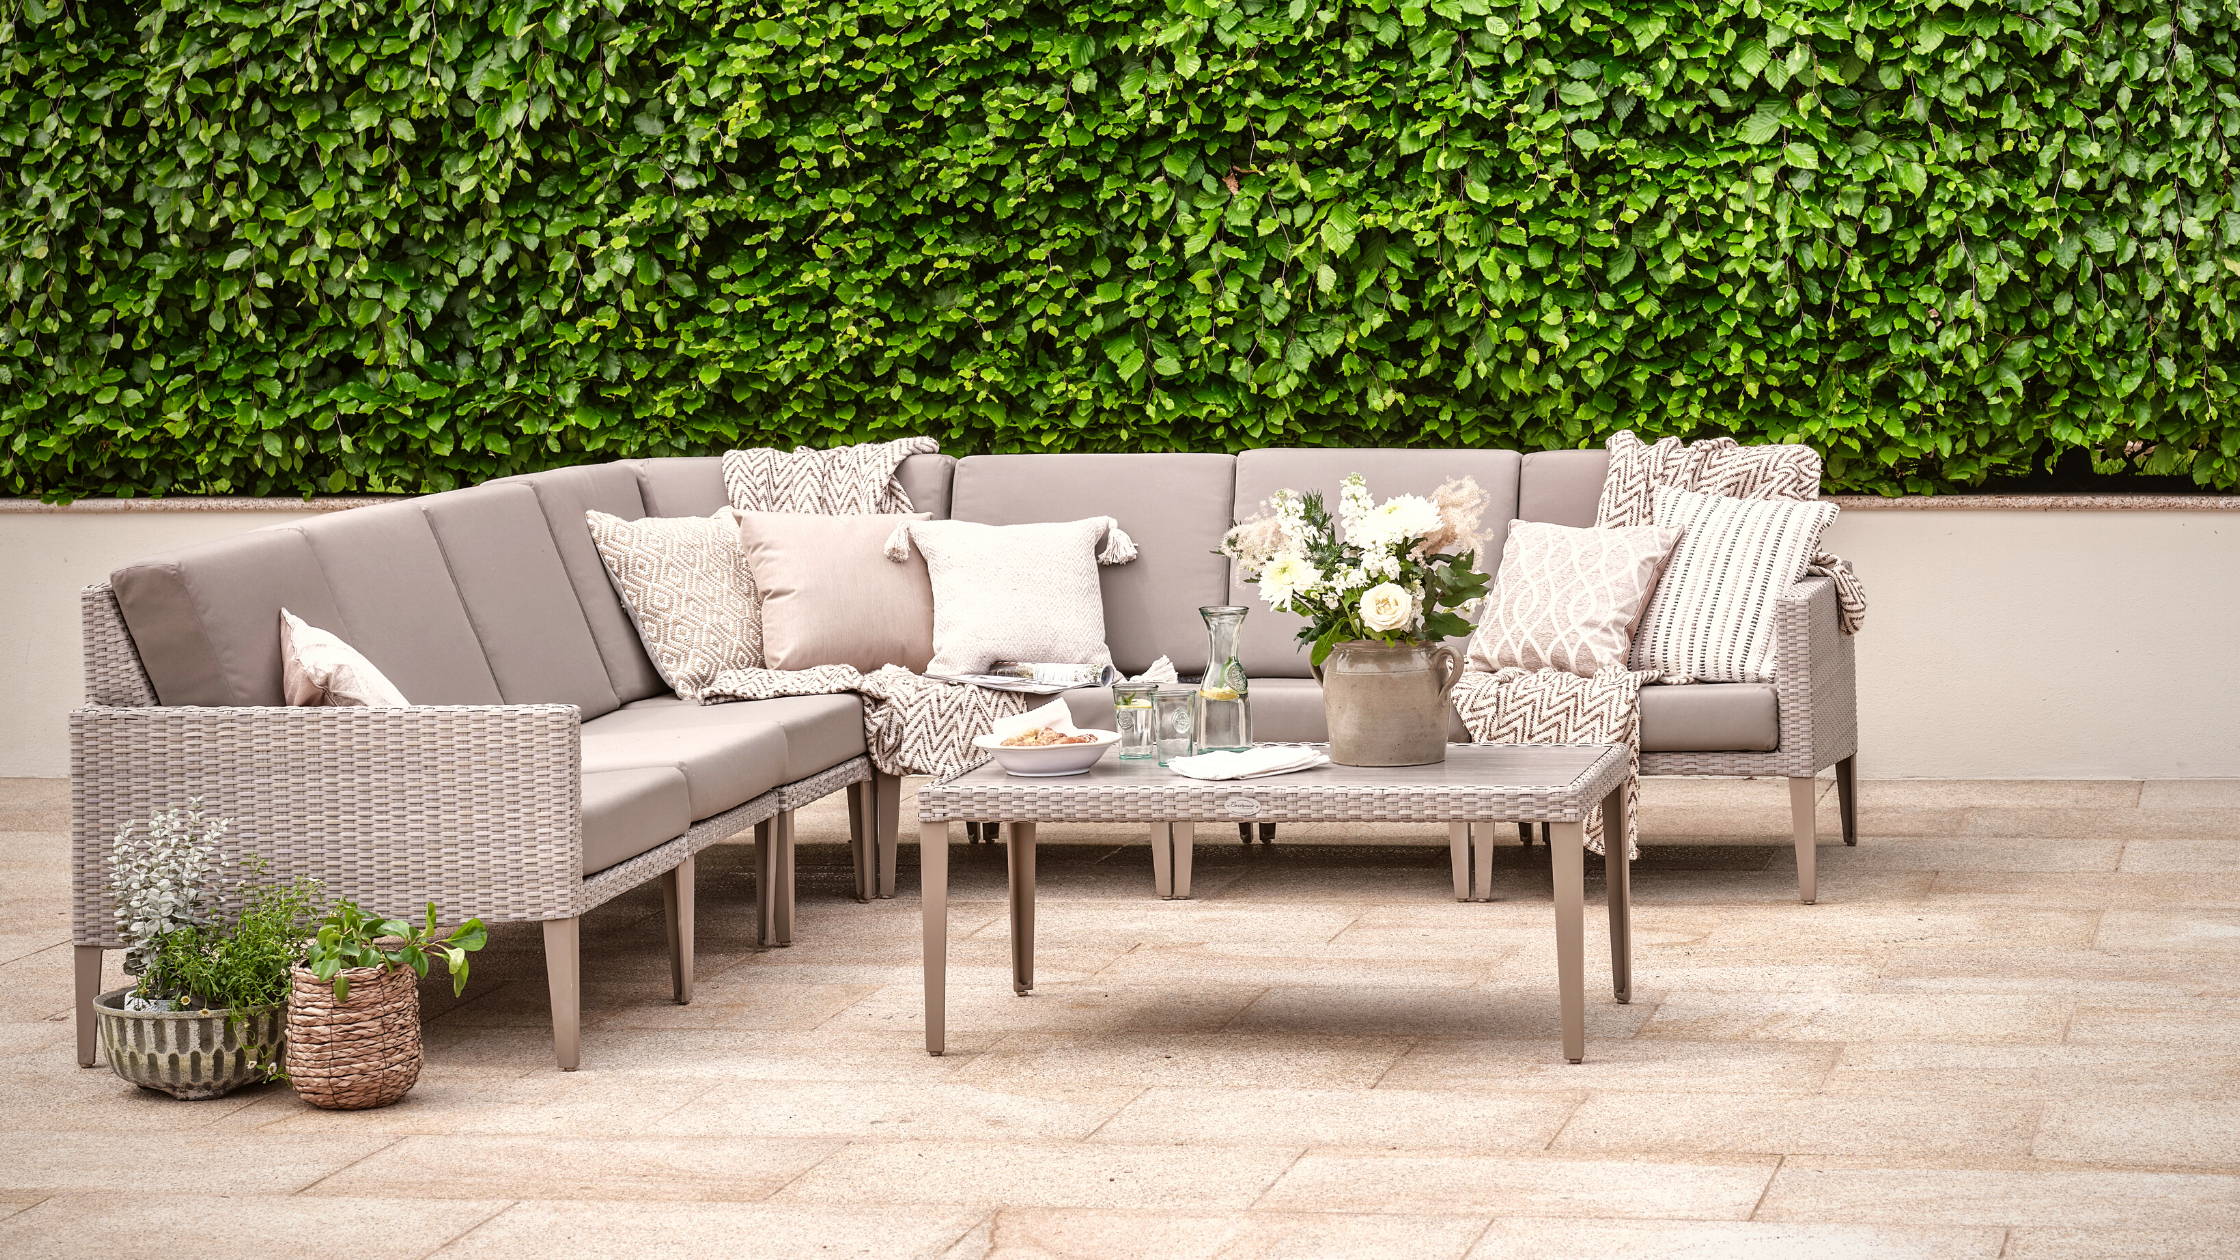 Rattan garden furniture modular sofa set covered with beige cushions in a hedged garden.